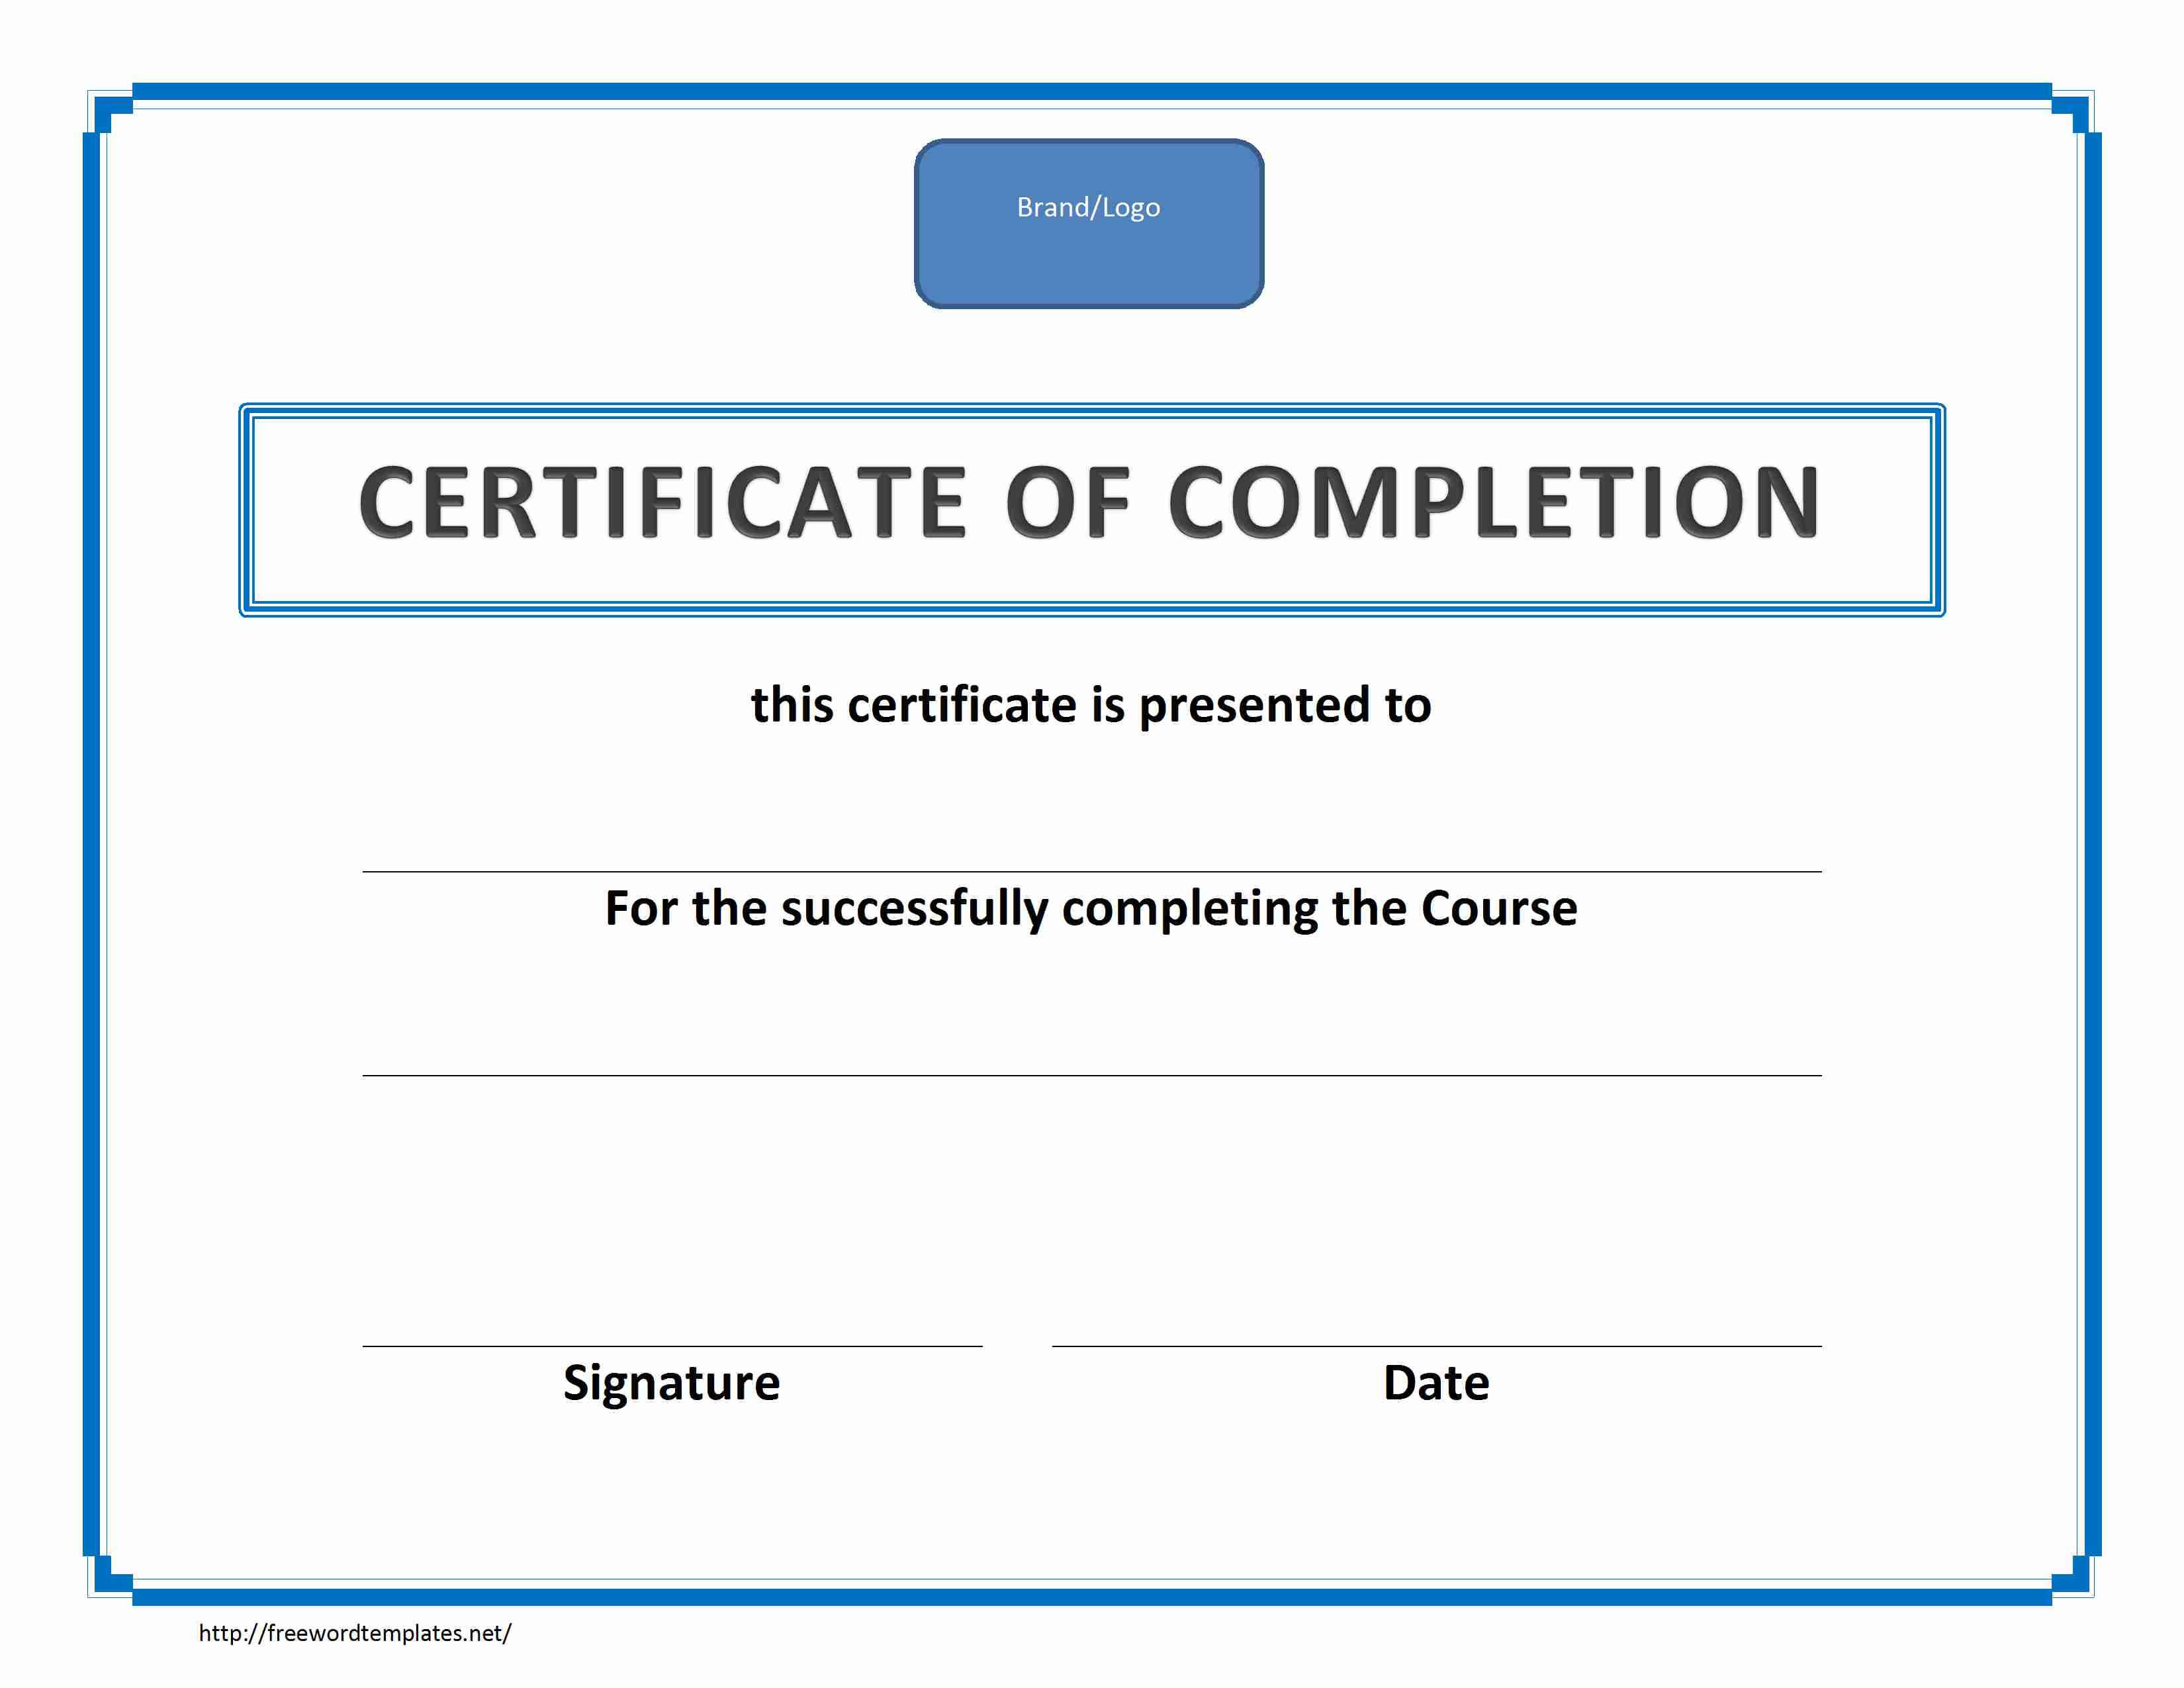 Training Certificate Of Completion In Template For Training Certificate